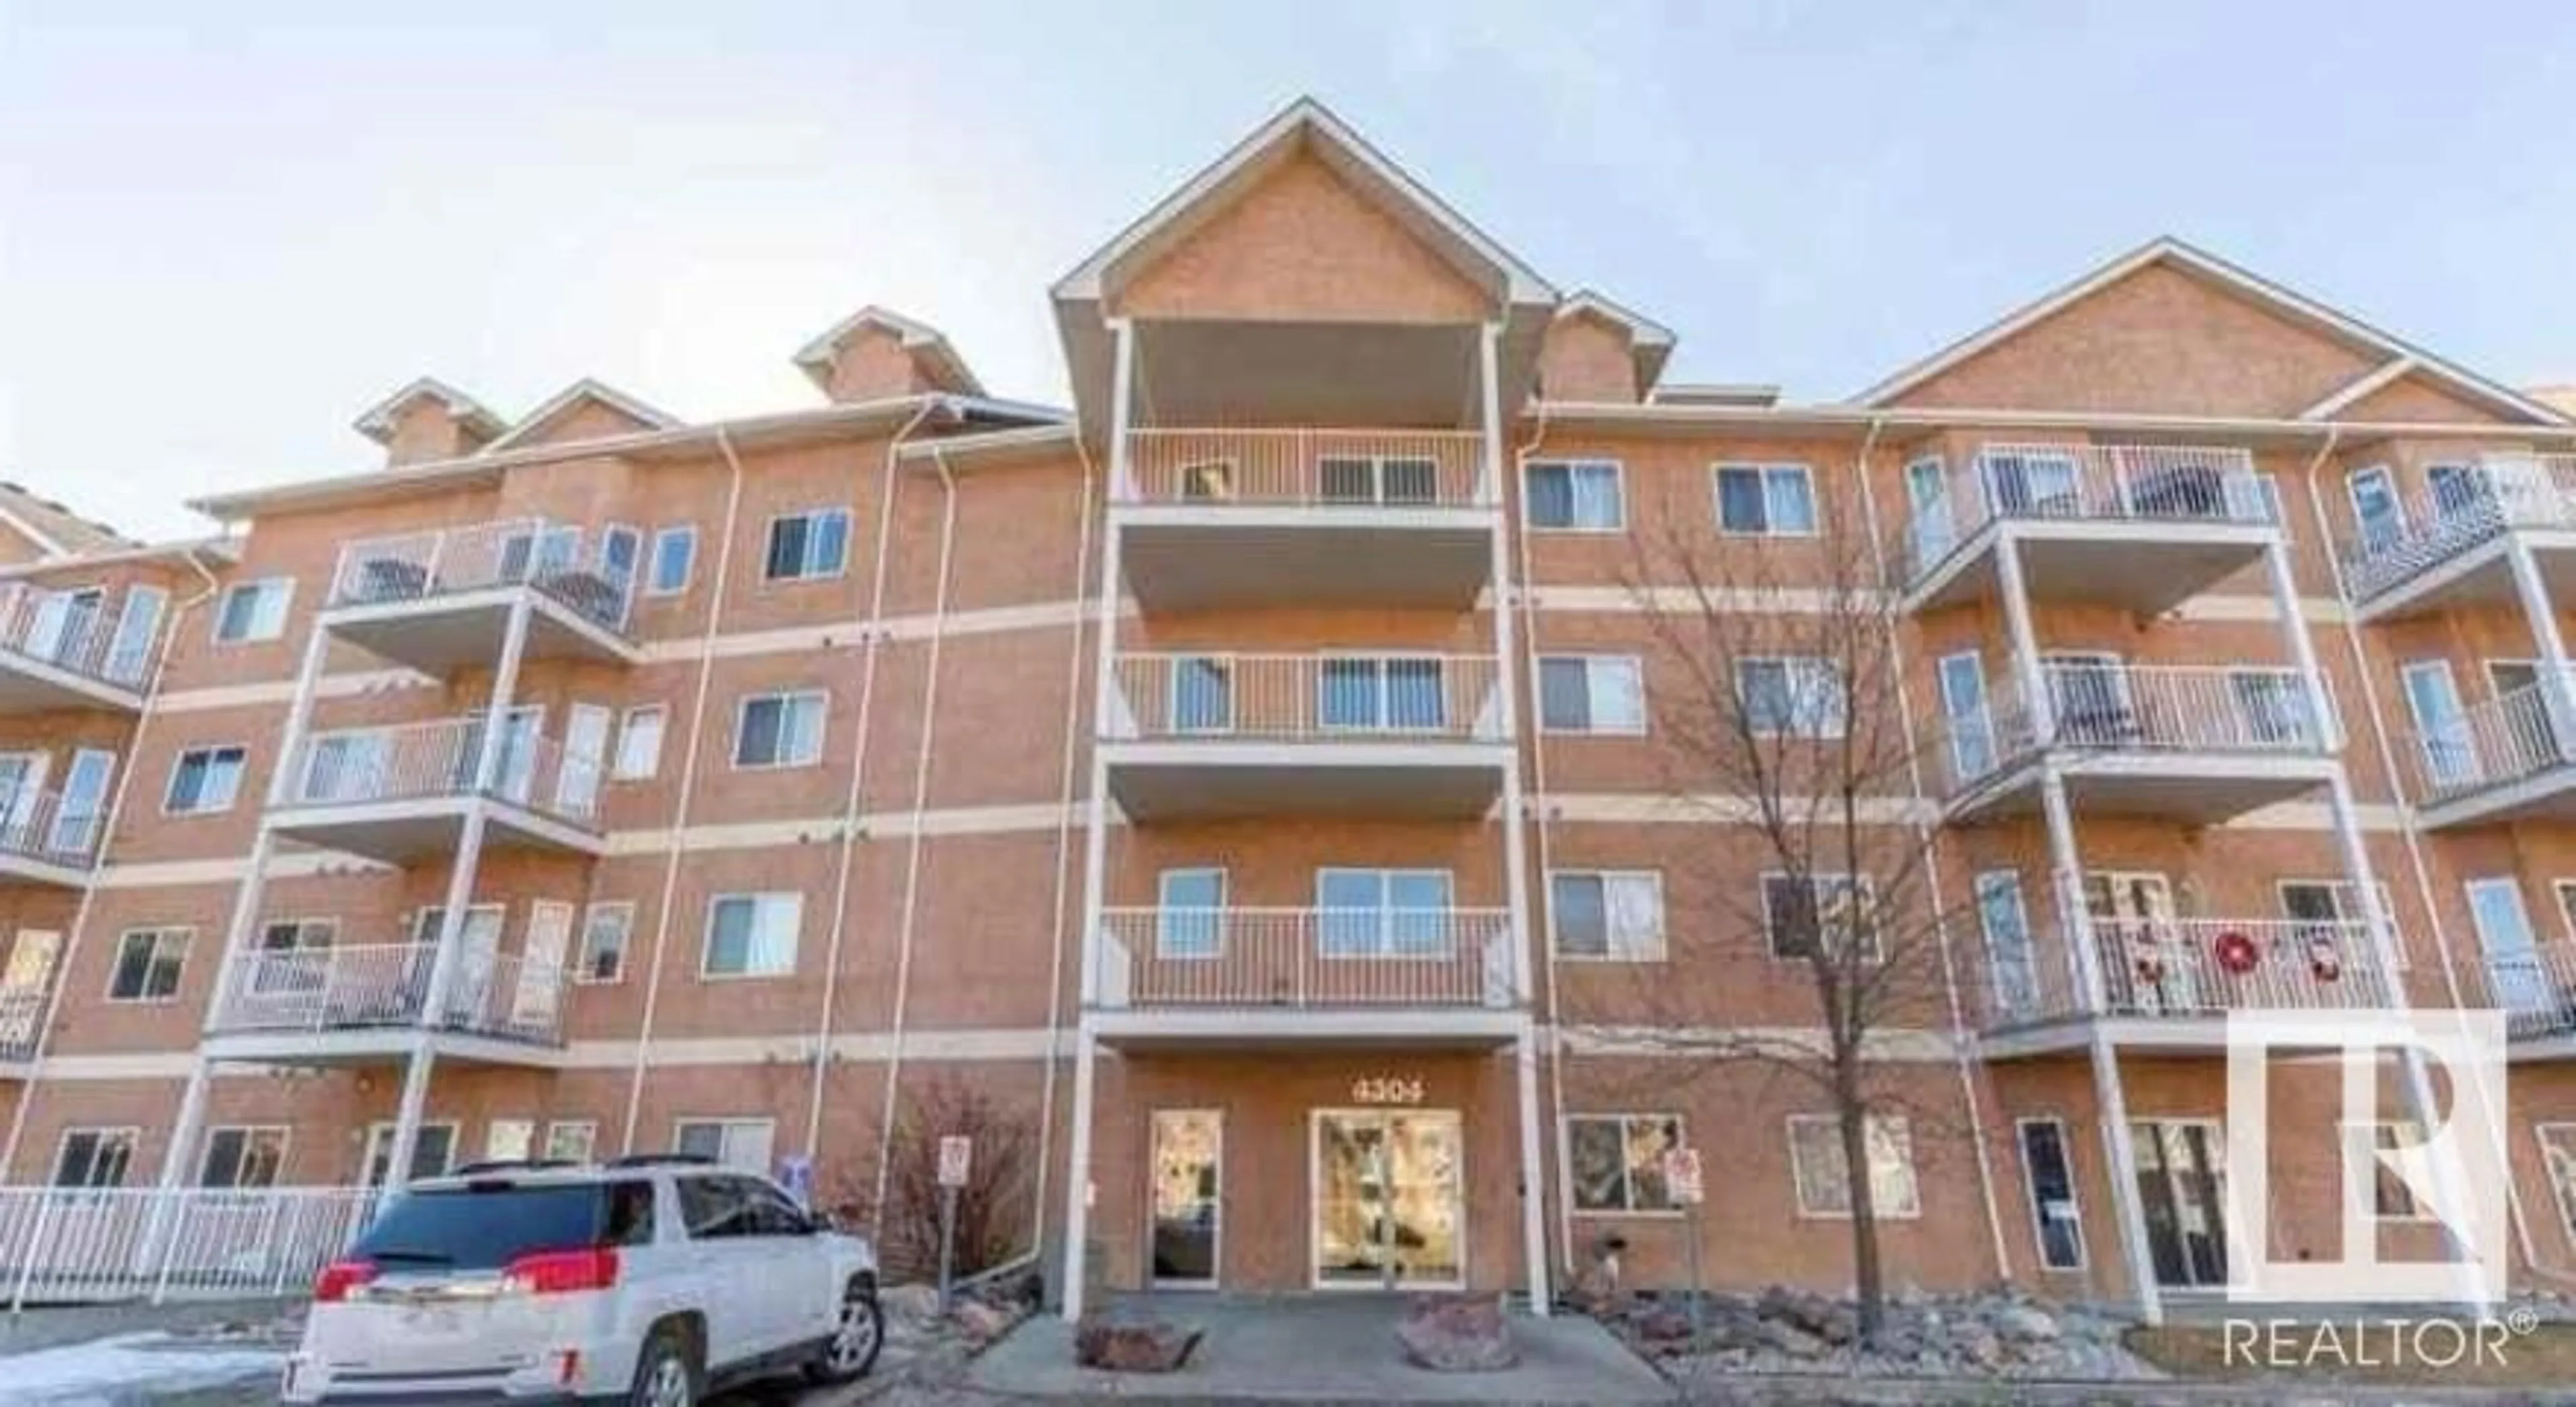 A pic from exterior of the house or condo for #122 4304 139 AV NW, Edmonton Alberta T5Y0H6